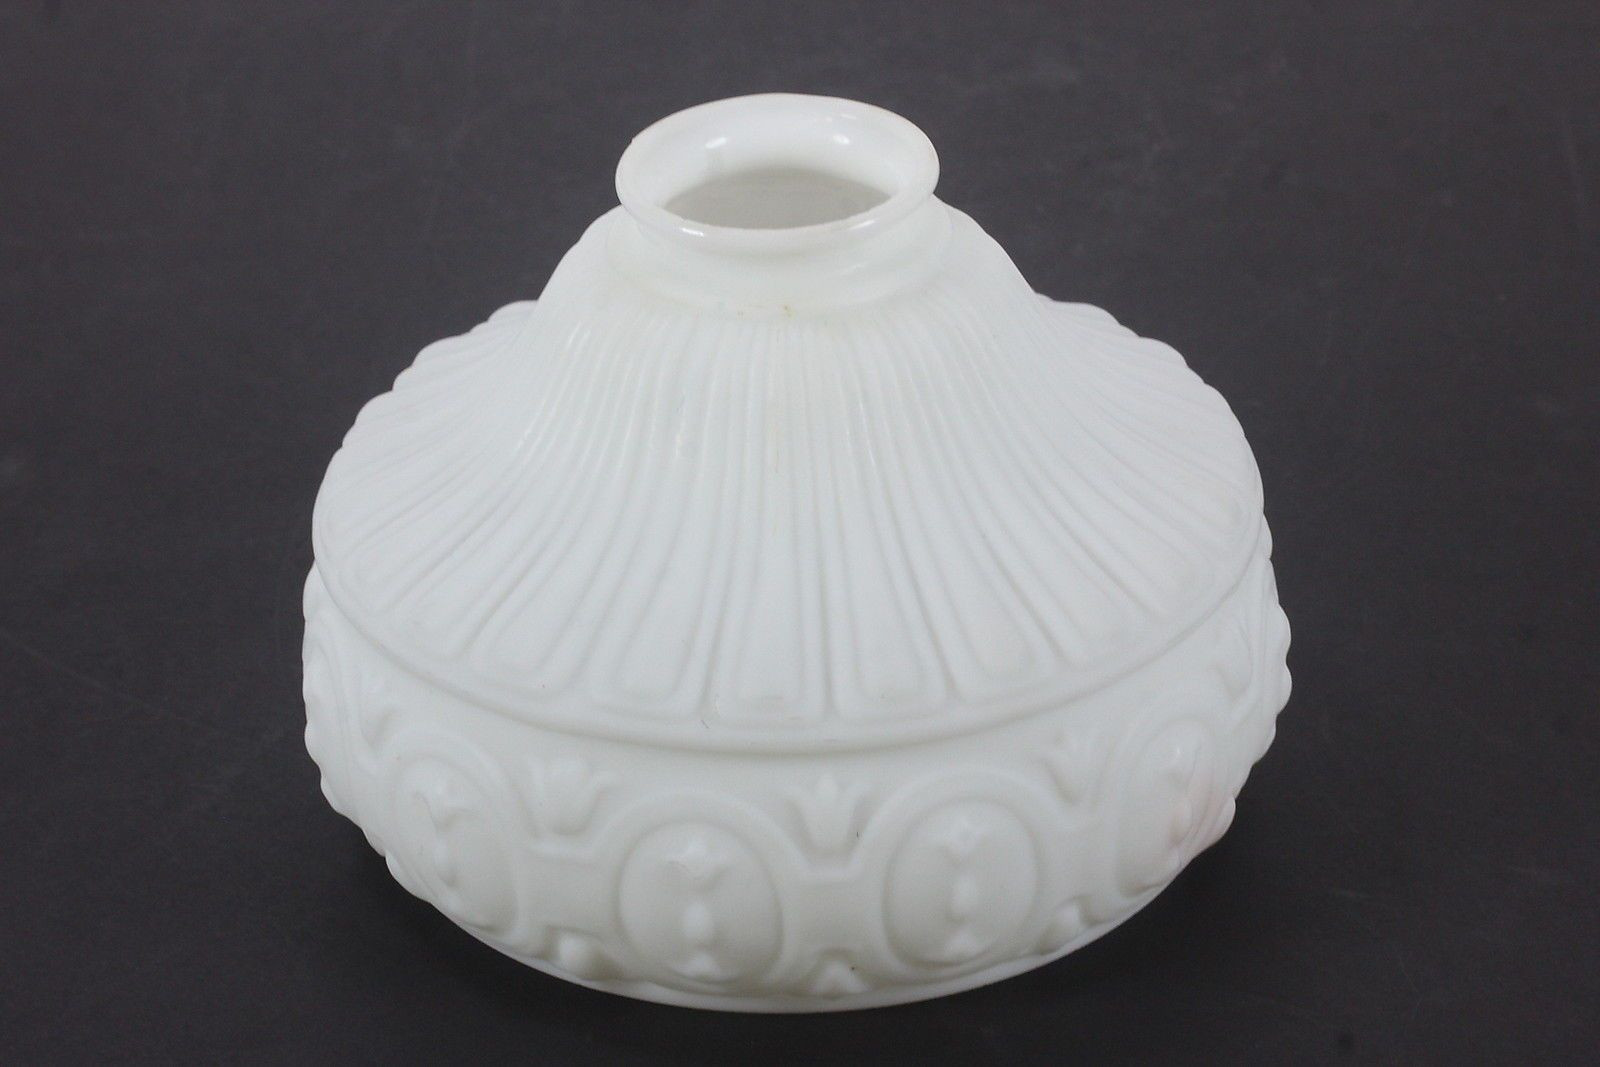 21 Lovable White Glass Vase Vintage 2024 free download white glass vase vintage of light shades parts rooftop antiques in antique white glass satin finish light shade sconce 2 1 4 fitter 7